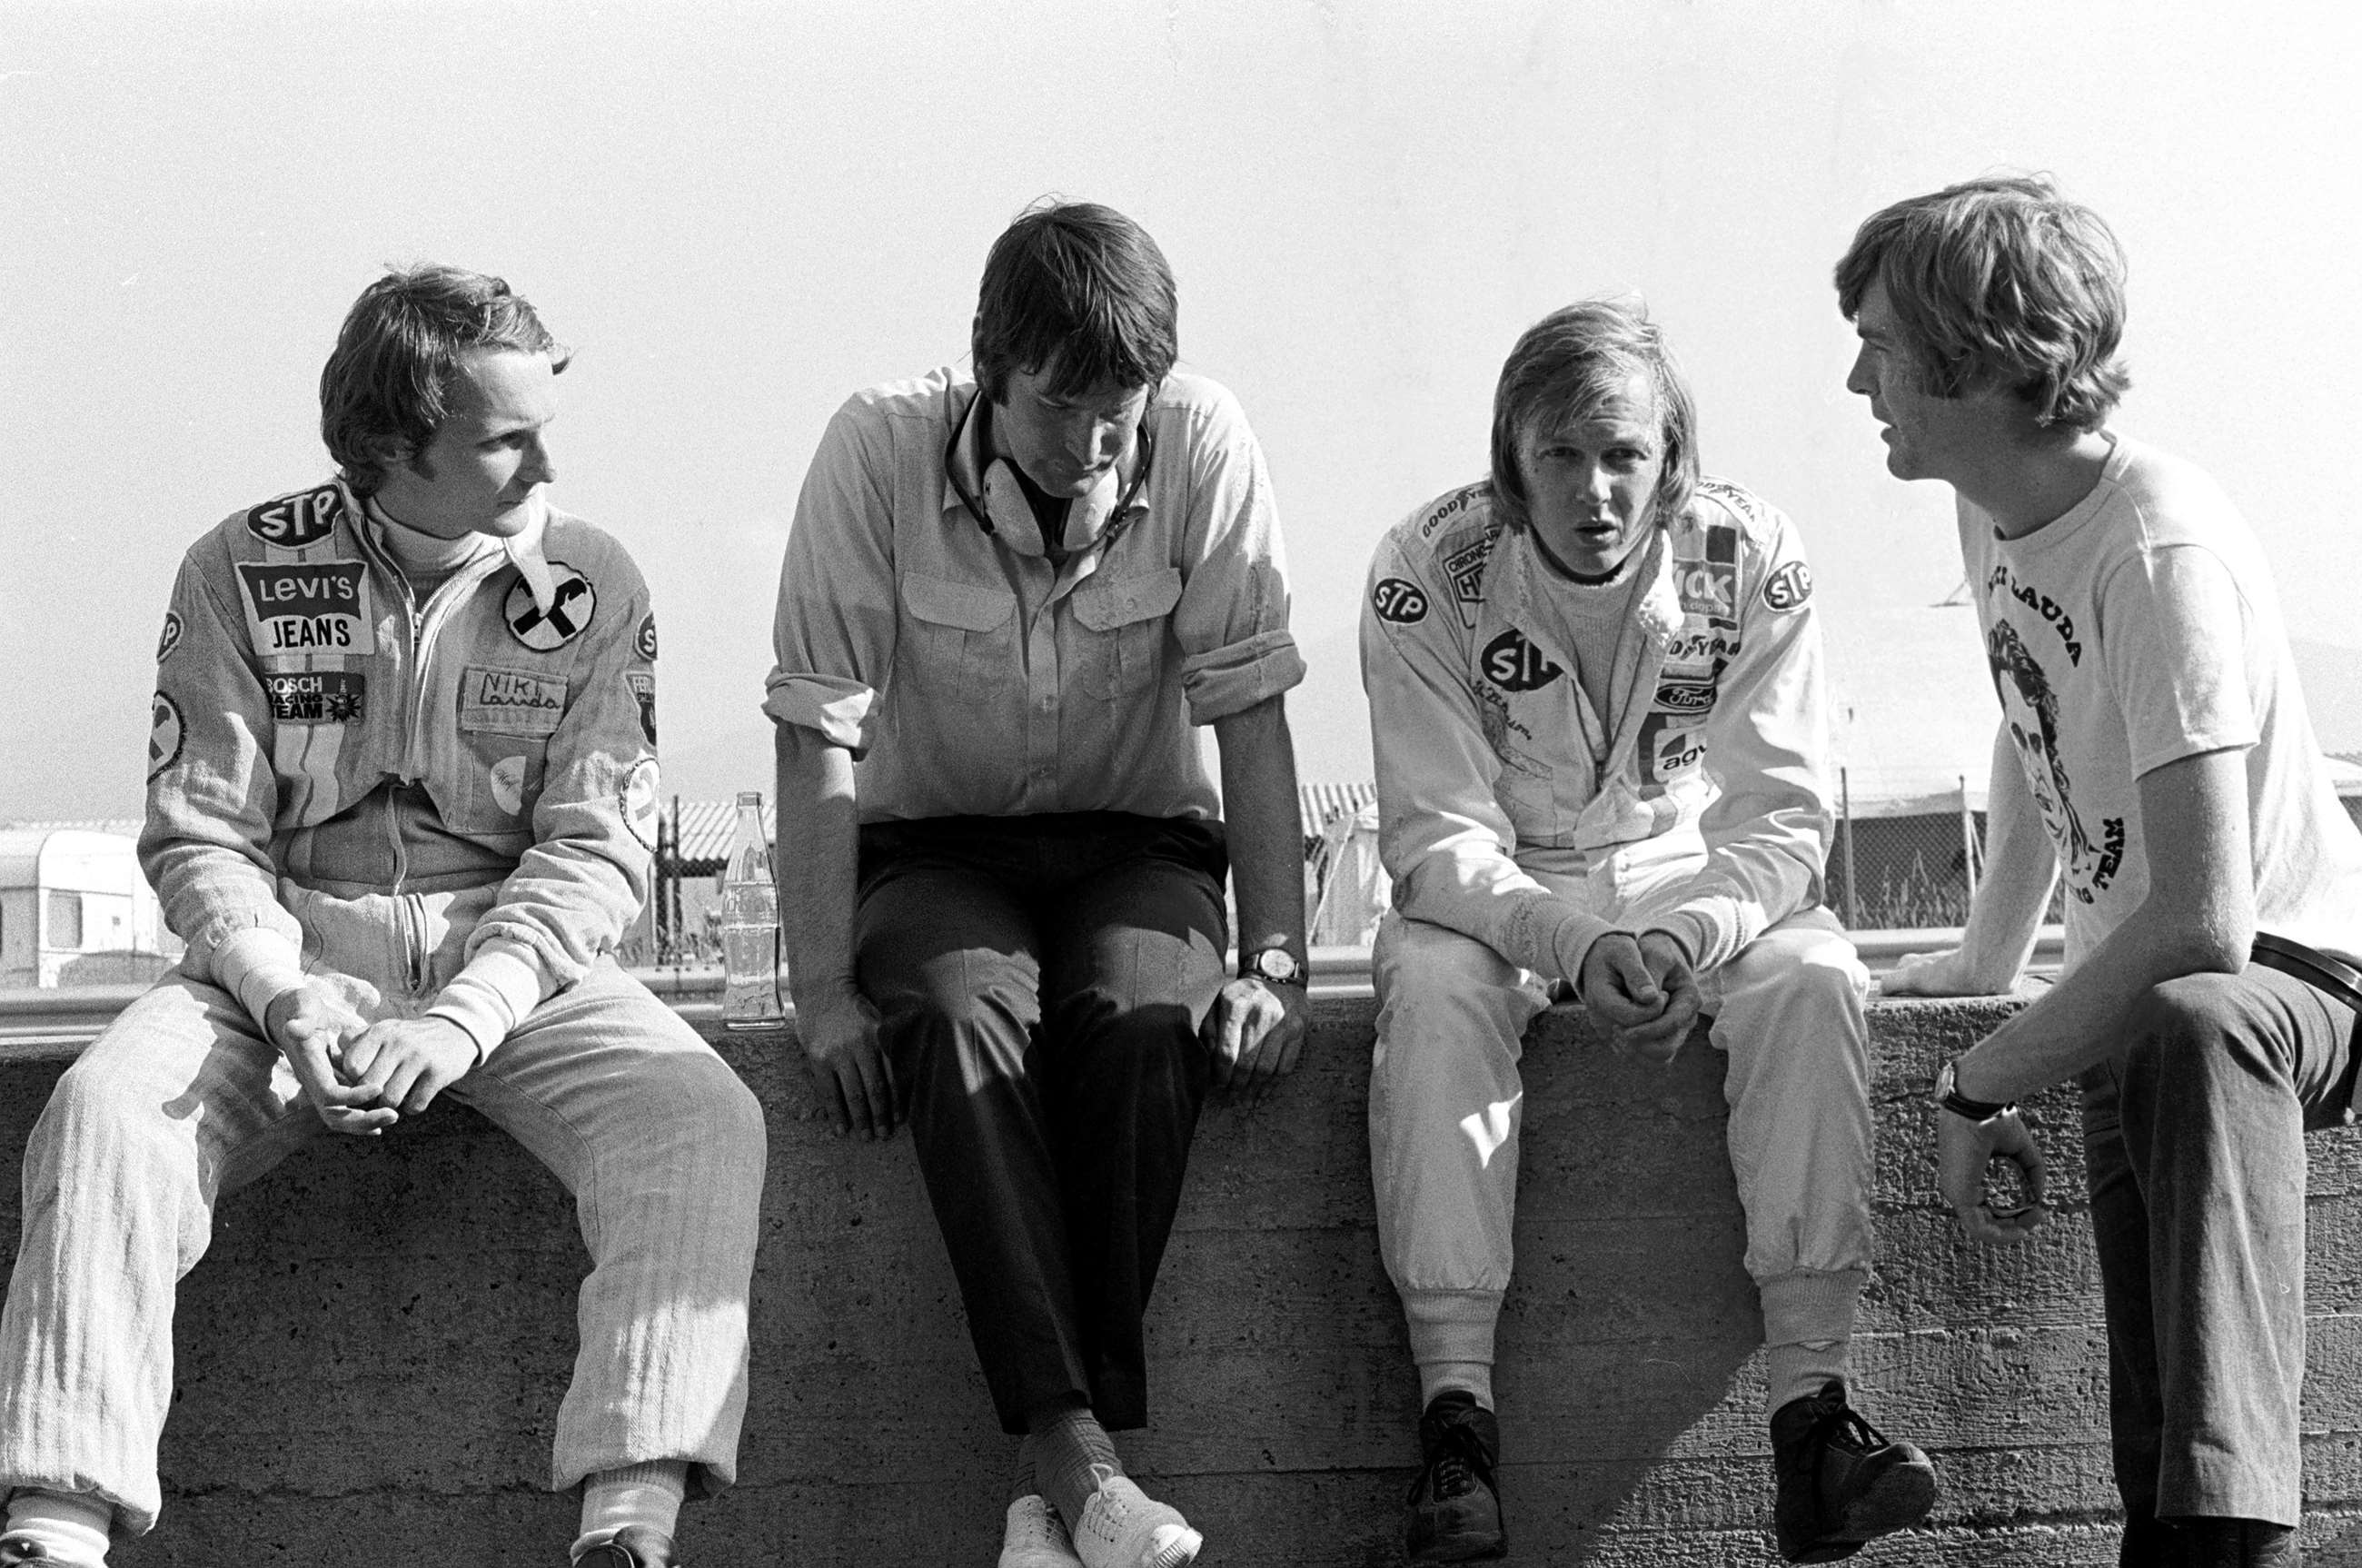 Left to right: Niki Lauda, Robin Herd, Ronnie Peterson and Max Mosley. Austria, 1972.